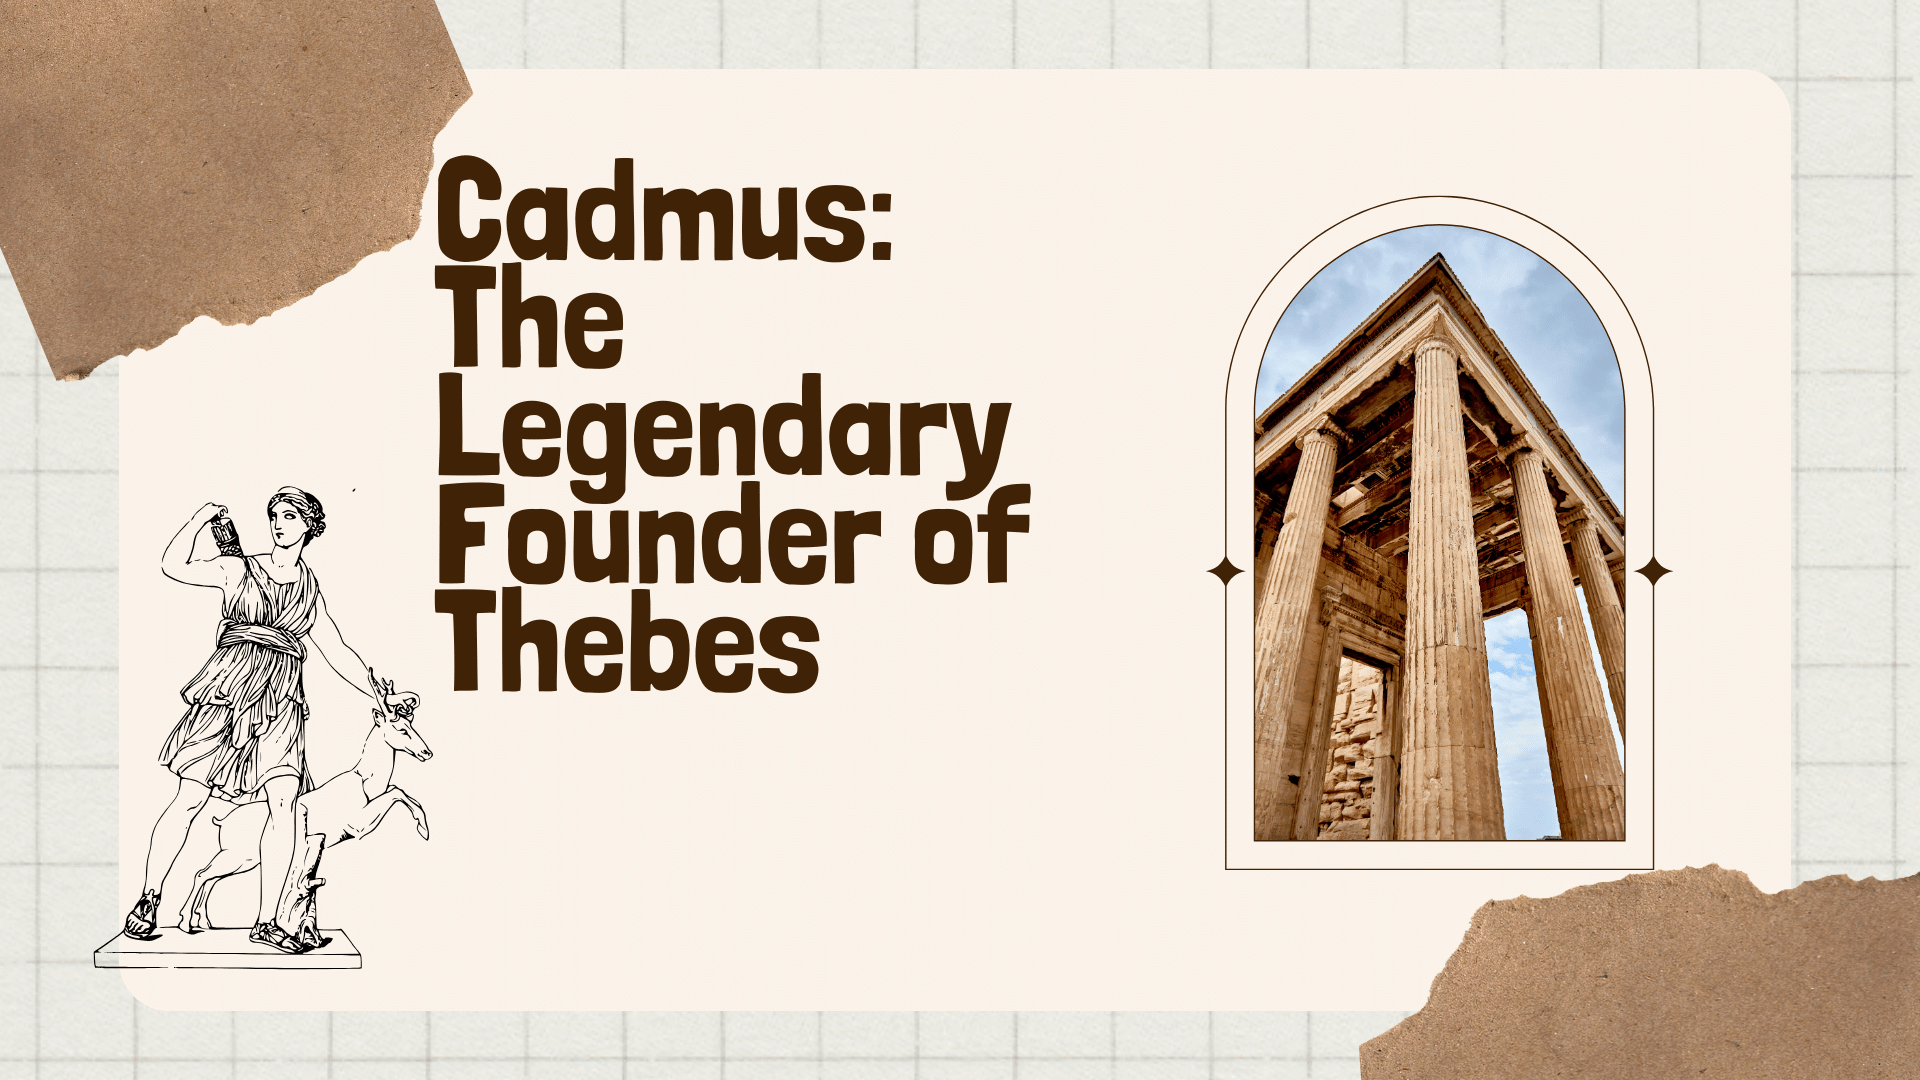 Cadmus: The Legendary Founder of Thebes